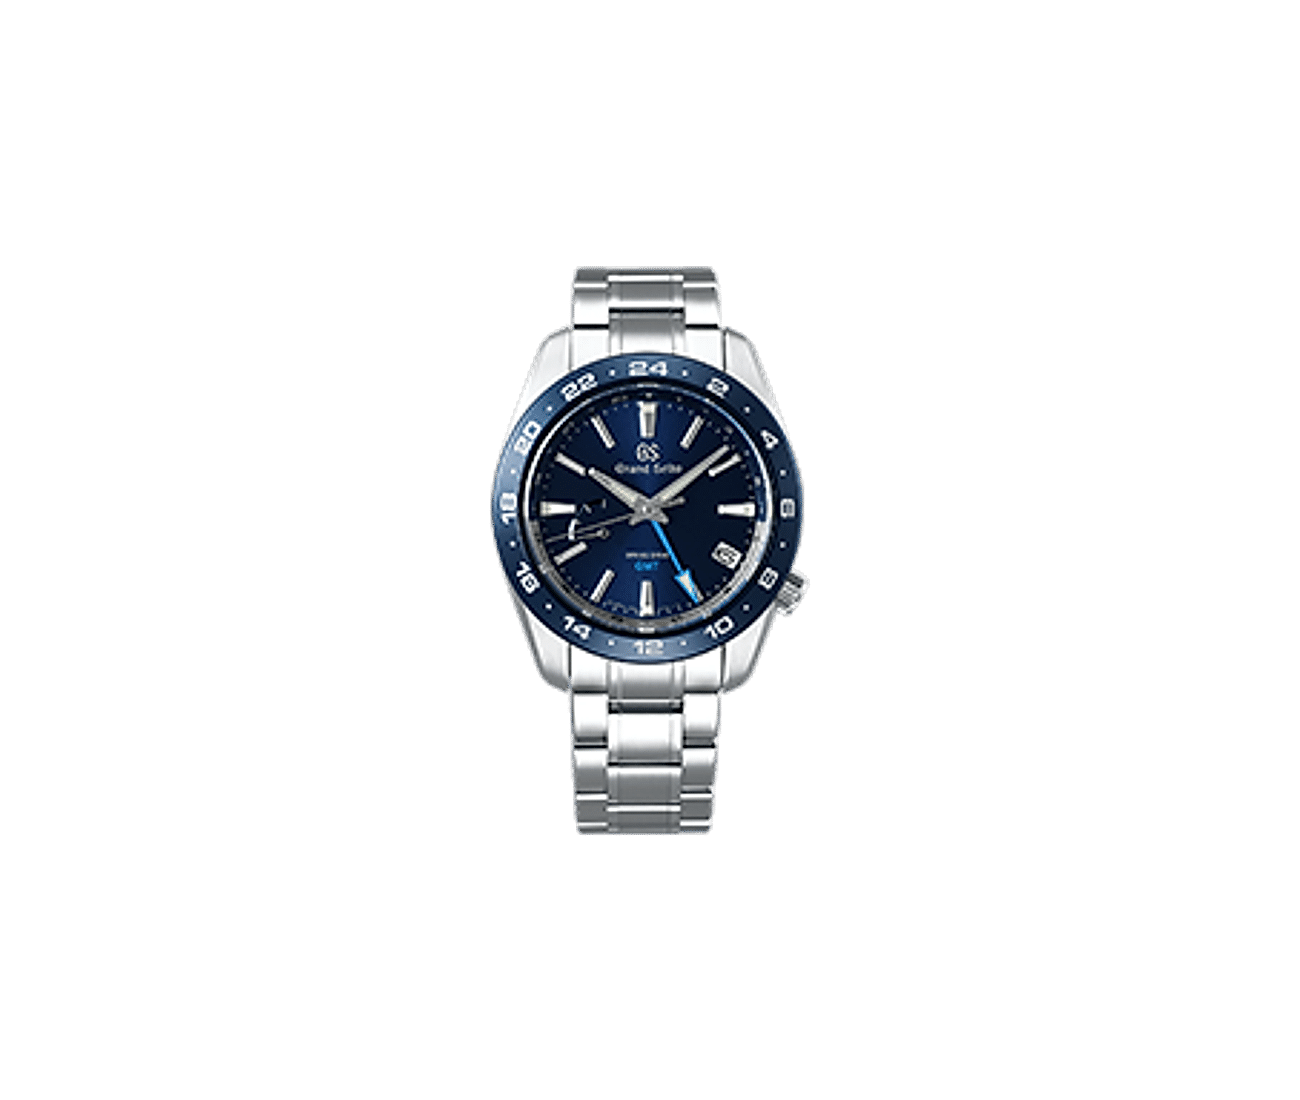 Spring Drive GMT with Ceramic Bezel